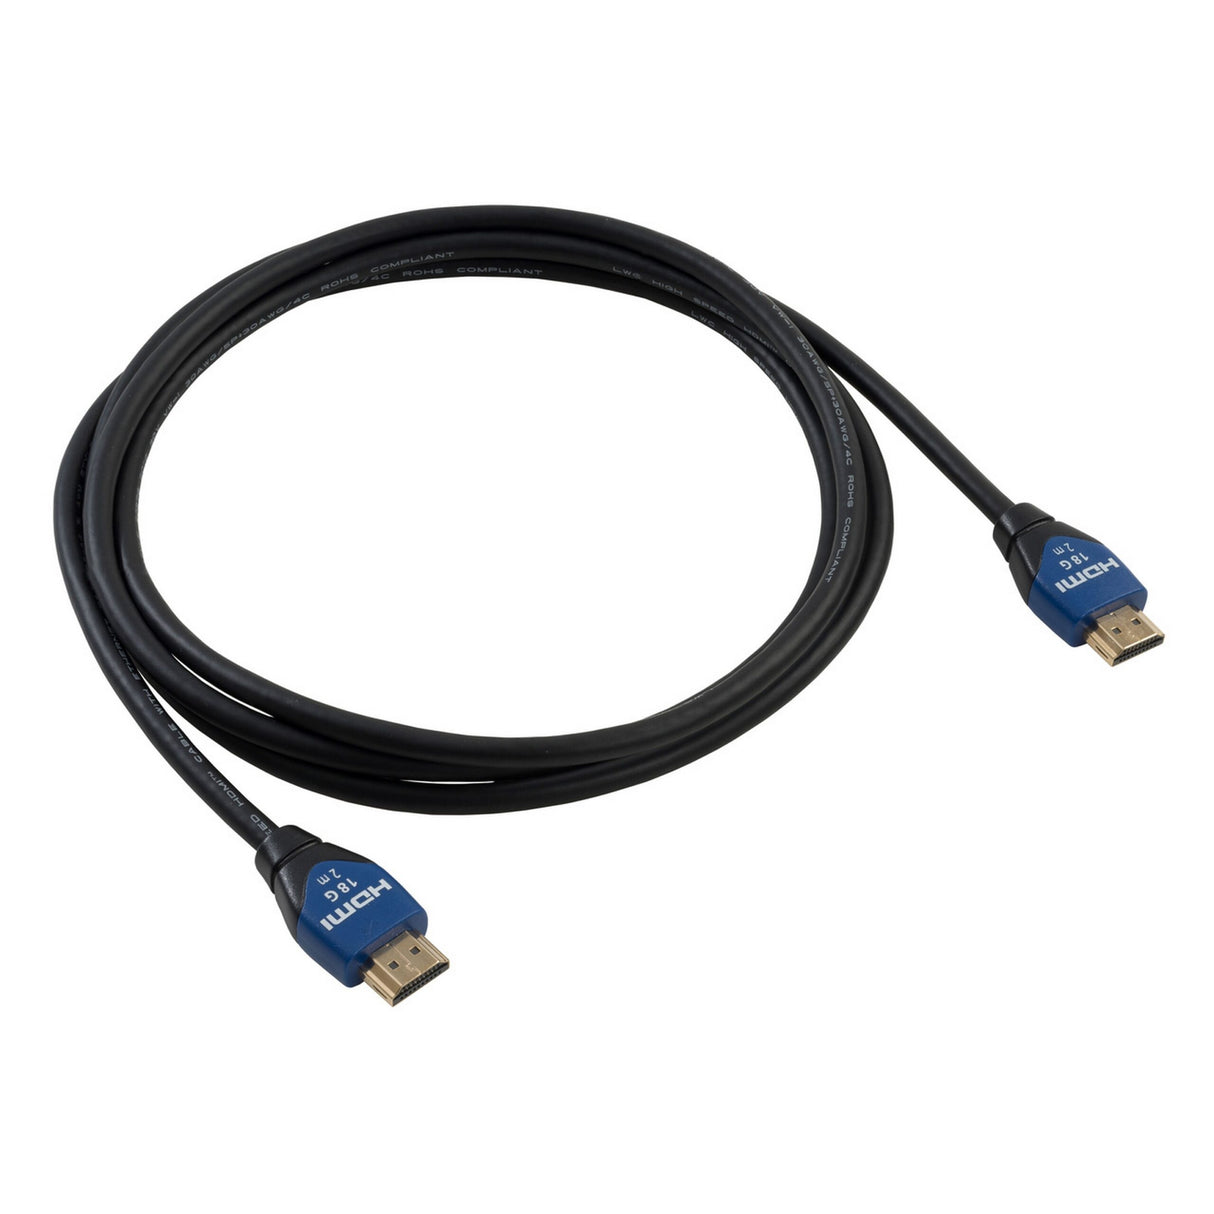 Liberty AV HALO-HC08M 8-Meter HALO Series High Speed HDMI Cable with Ethernet